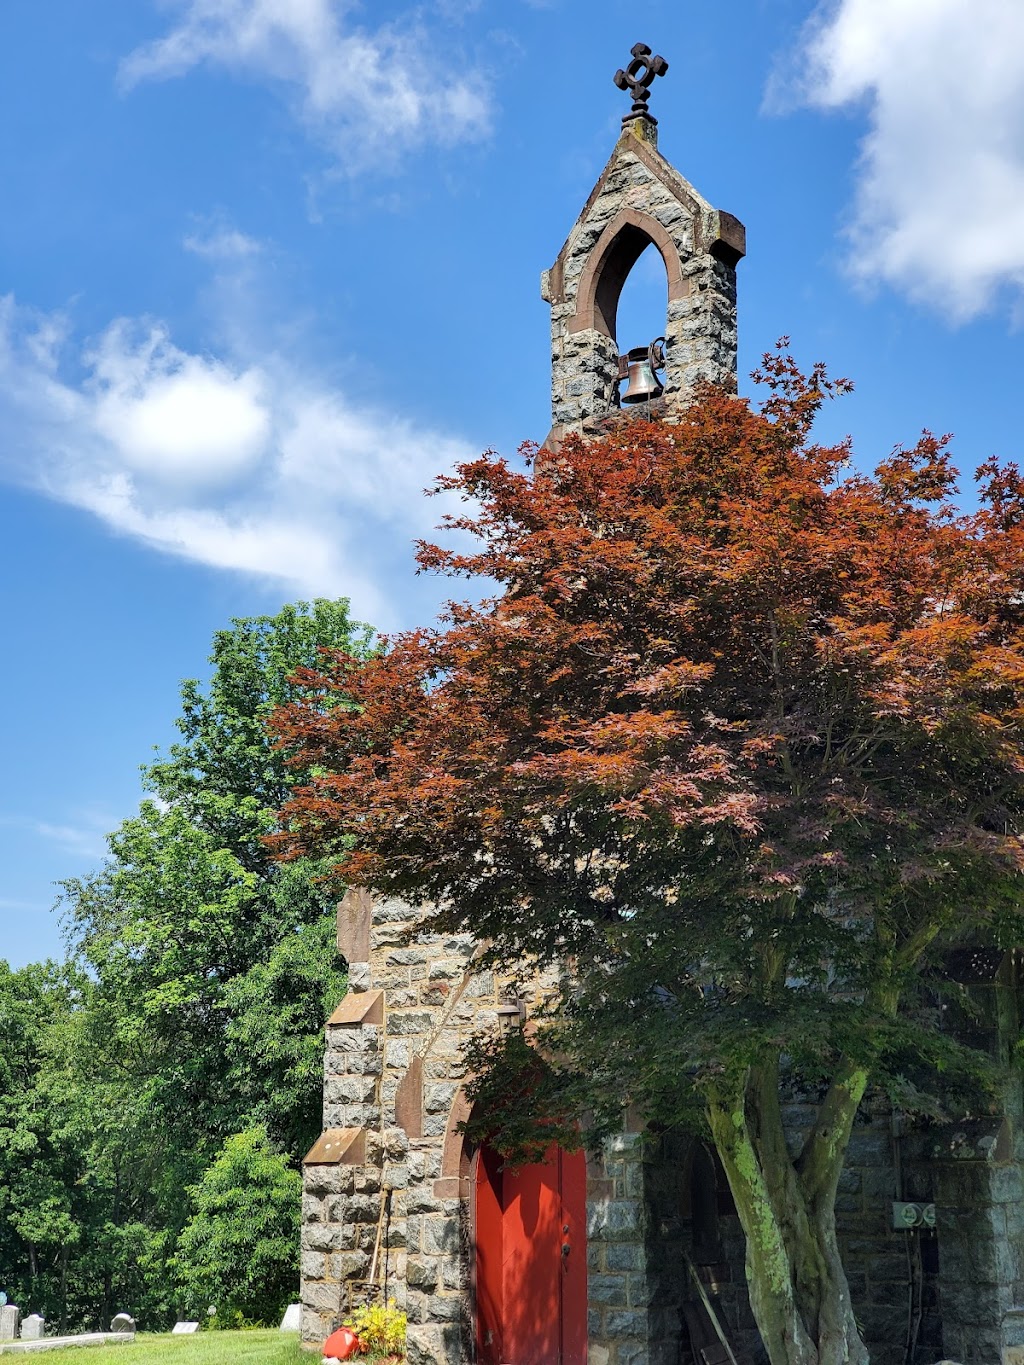 St. John’s Church in the Wilderness | Harriman State Park, 119 St St Johns Rd, Stony Point, NY 10980 | Phone: (845) 786-0366